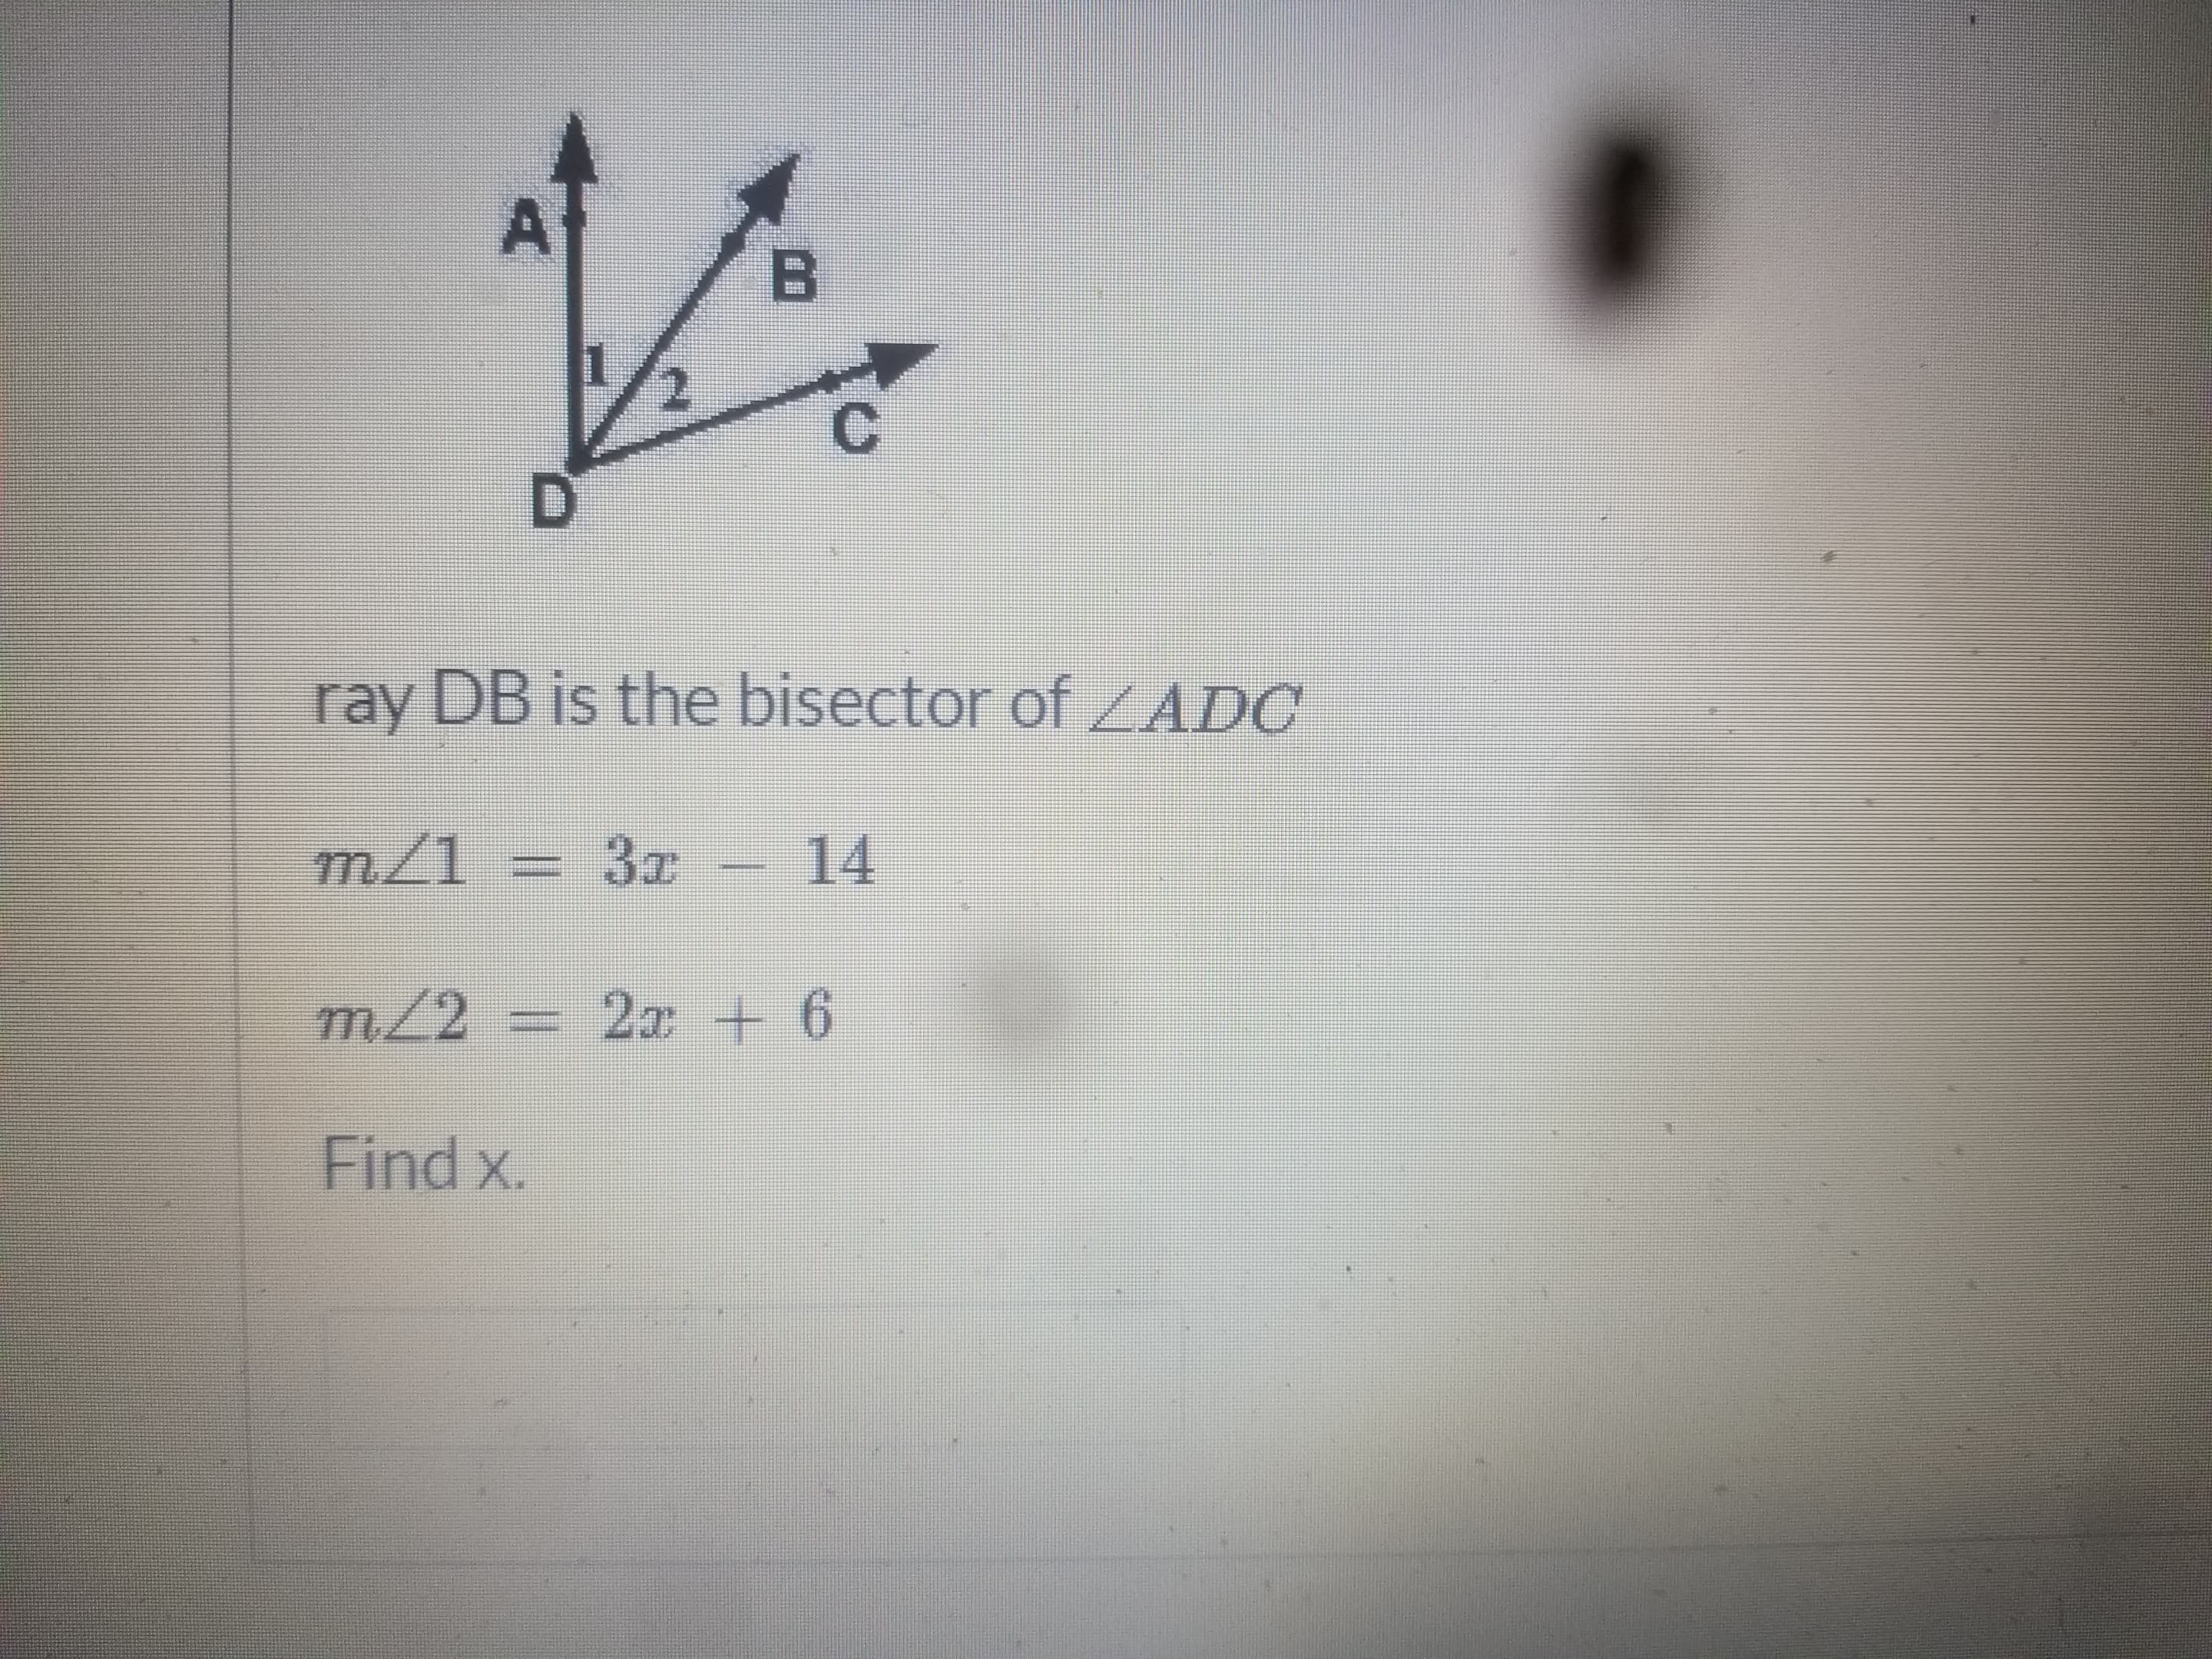 ray DB is the bisector of ADO
